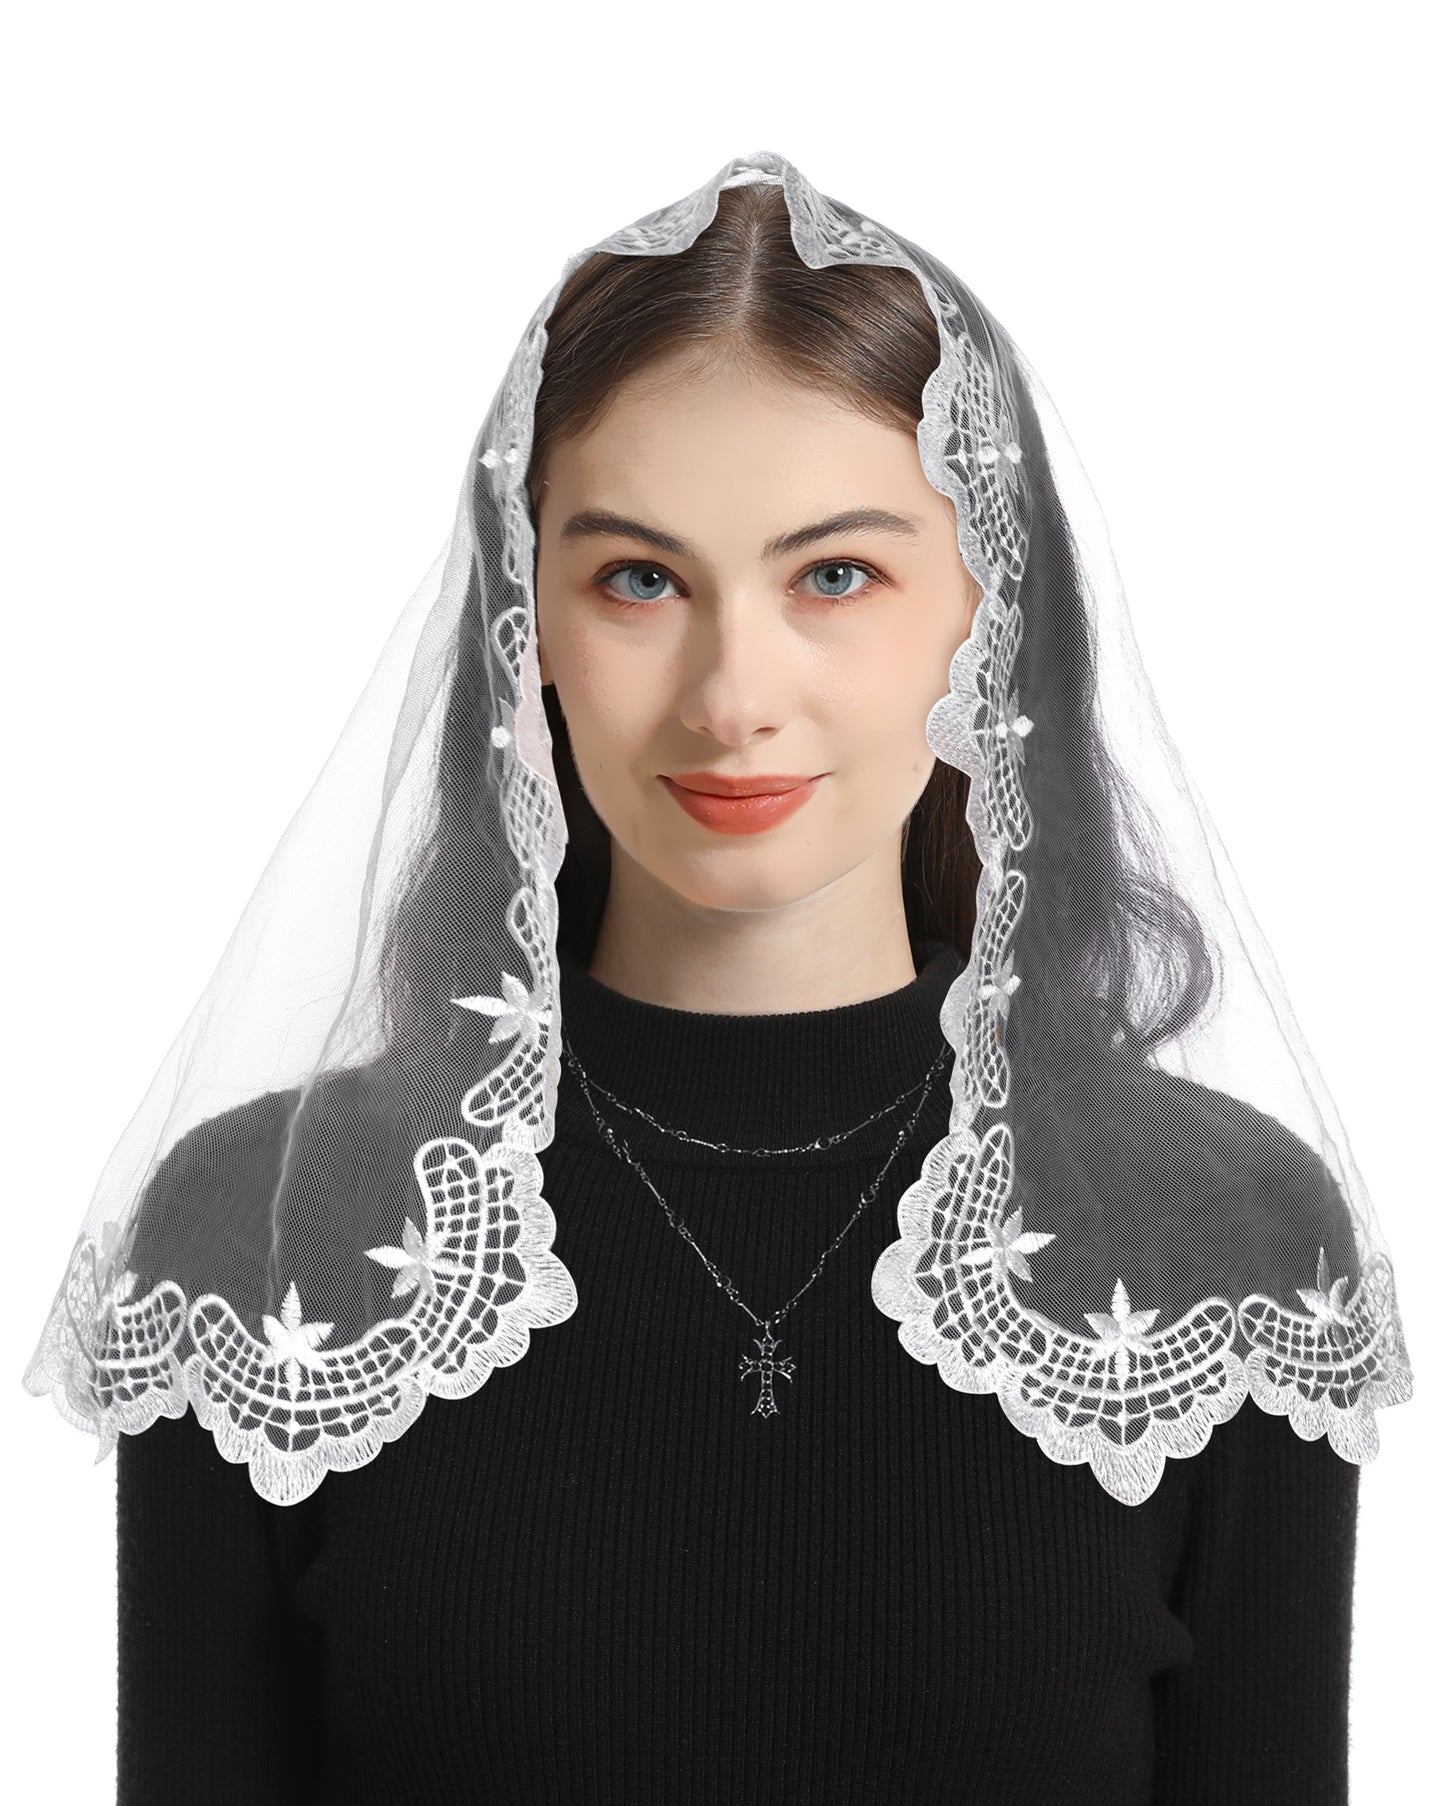 Bozidol Chapel Veils Catholic Mass Mantilla - Virgin and Child Embroidery Lace Triangle Head Coverings Floral Church Veil White